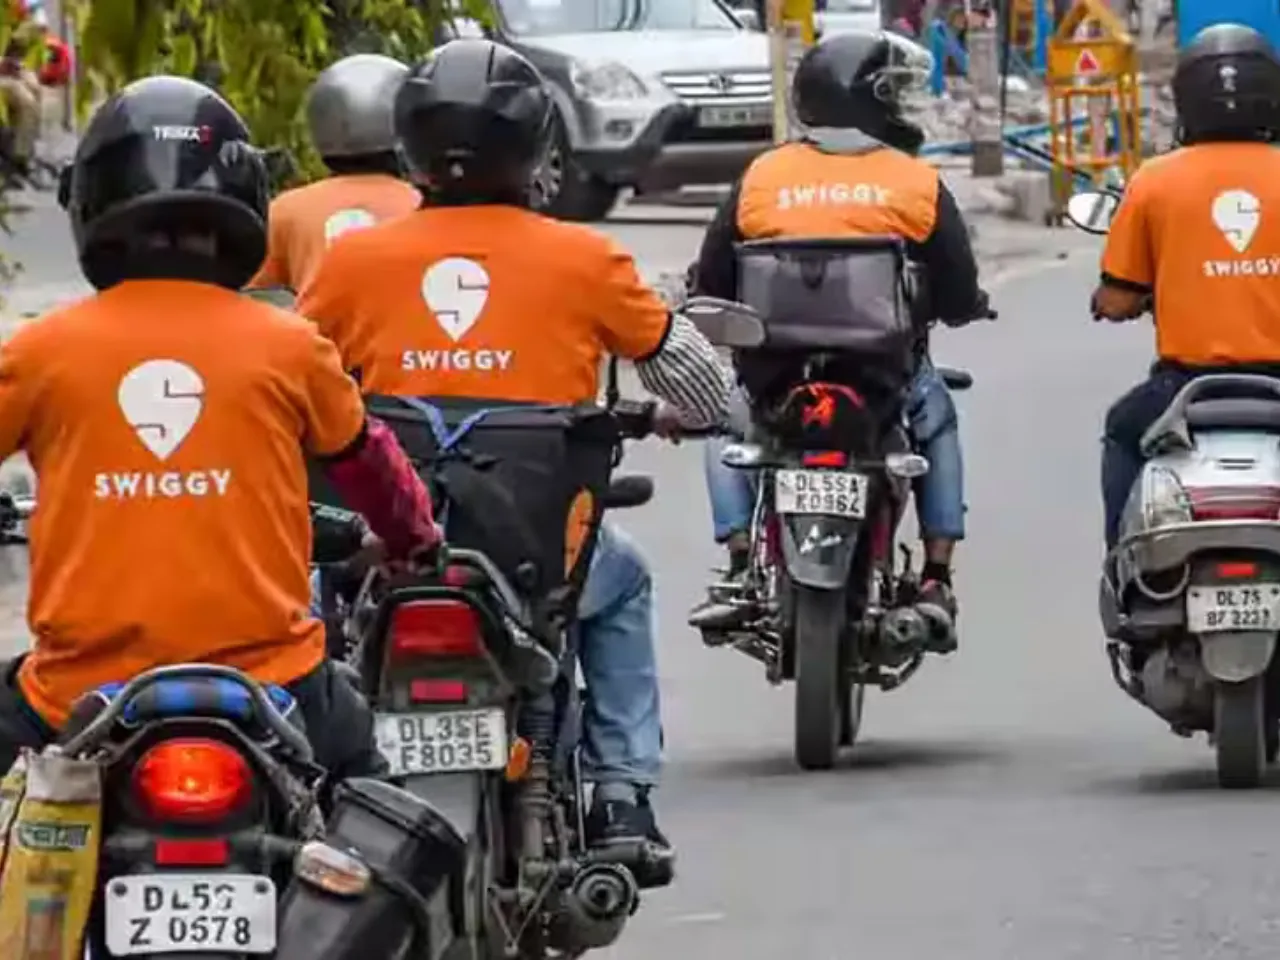 Swiggy nears decacorn status as Invesco marks up its valuation to $8.3 billion